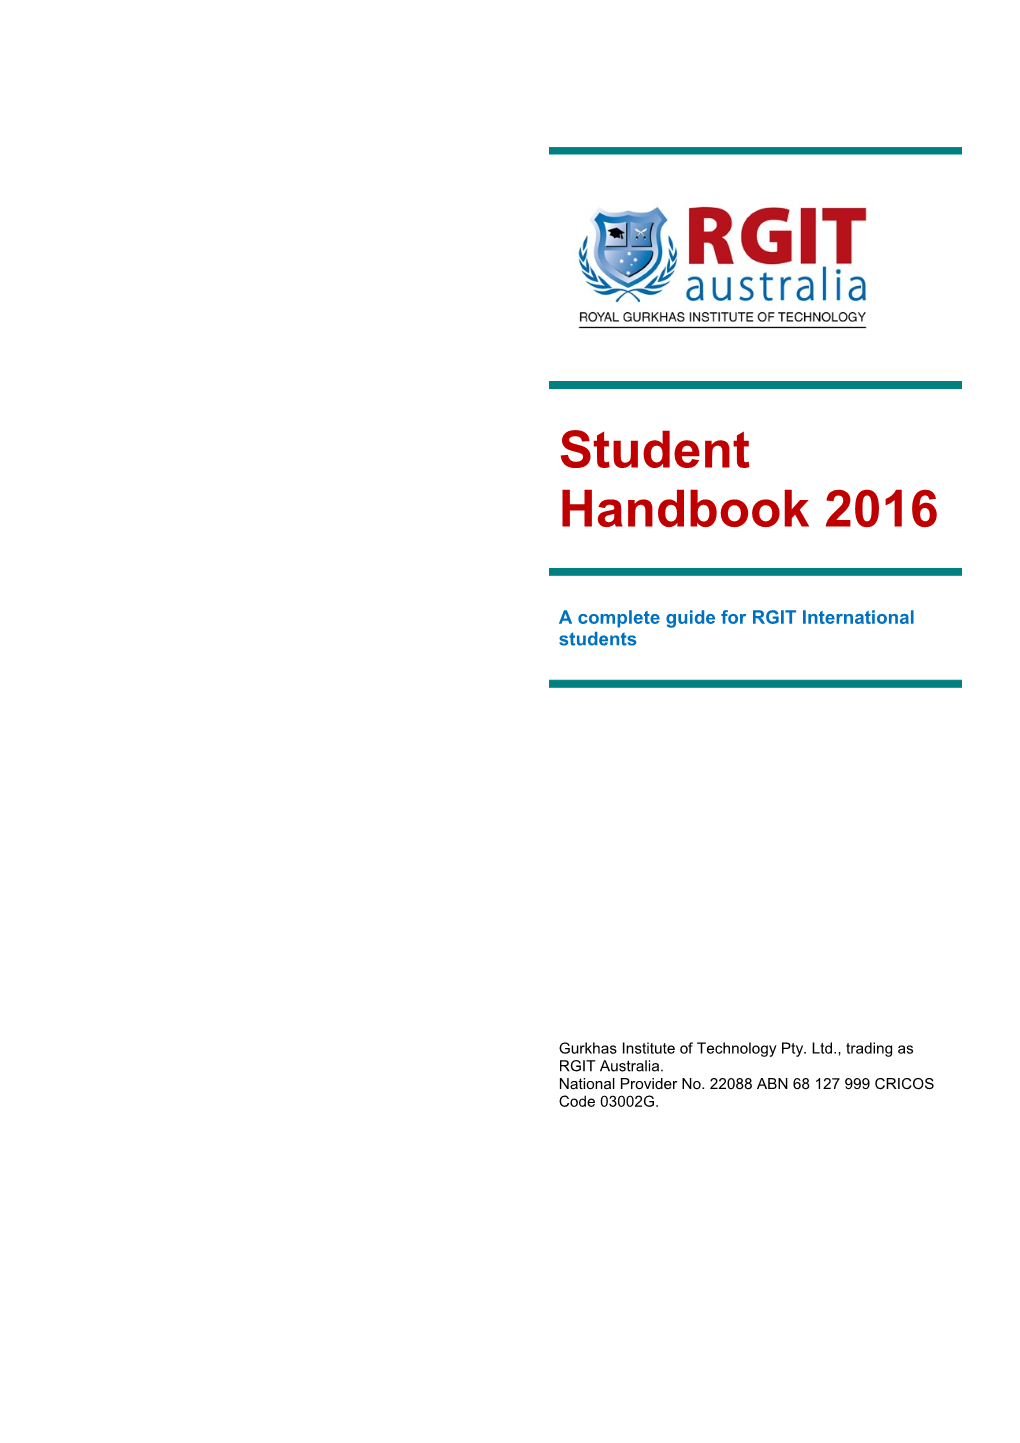 A Complete Guide for RGIT International Students